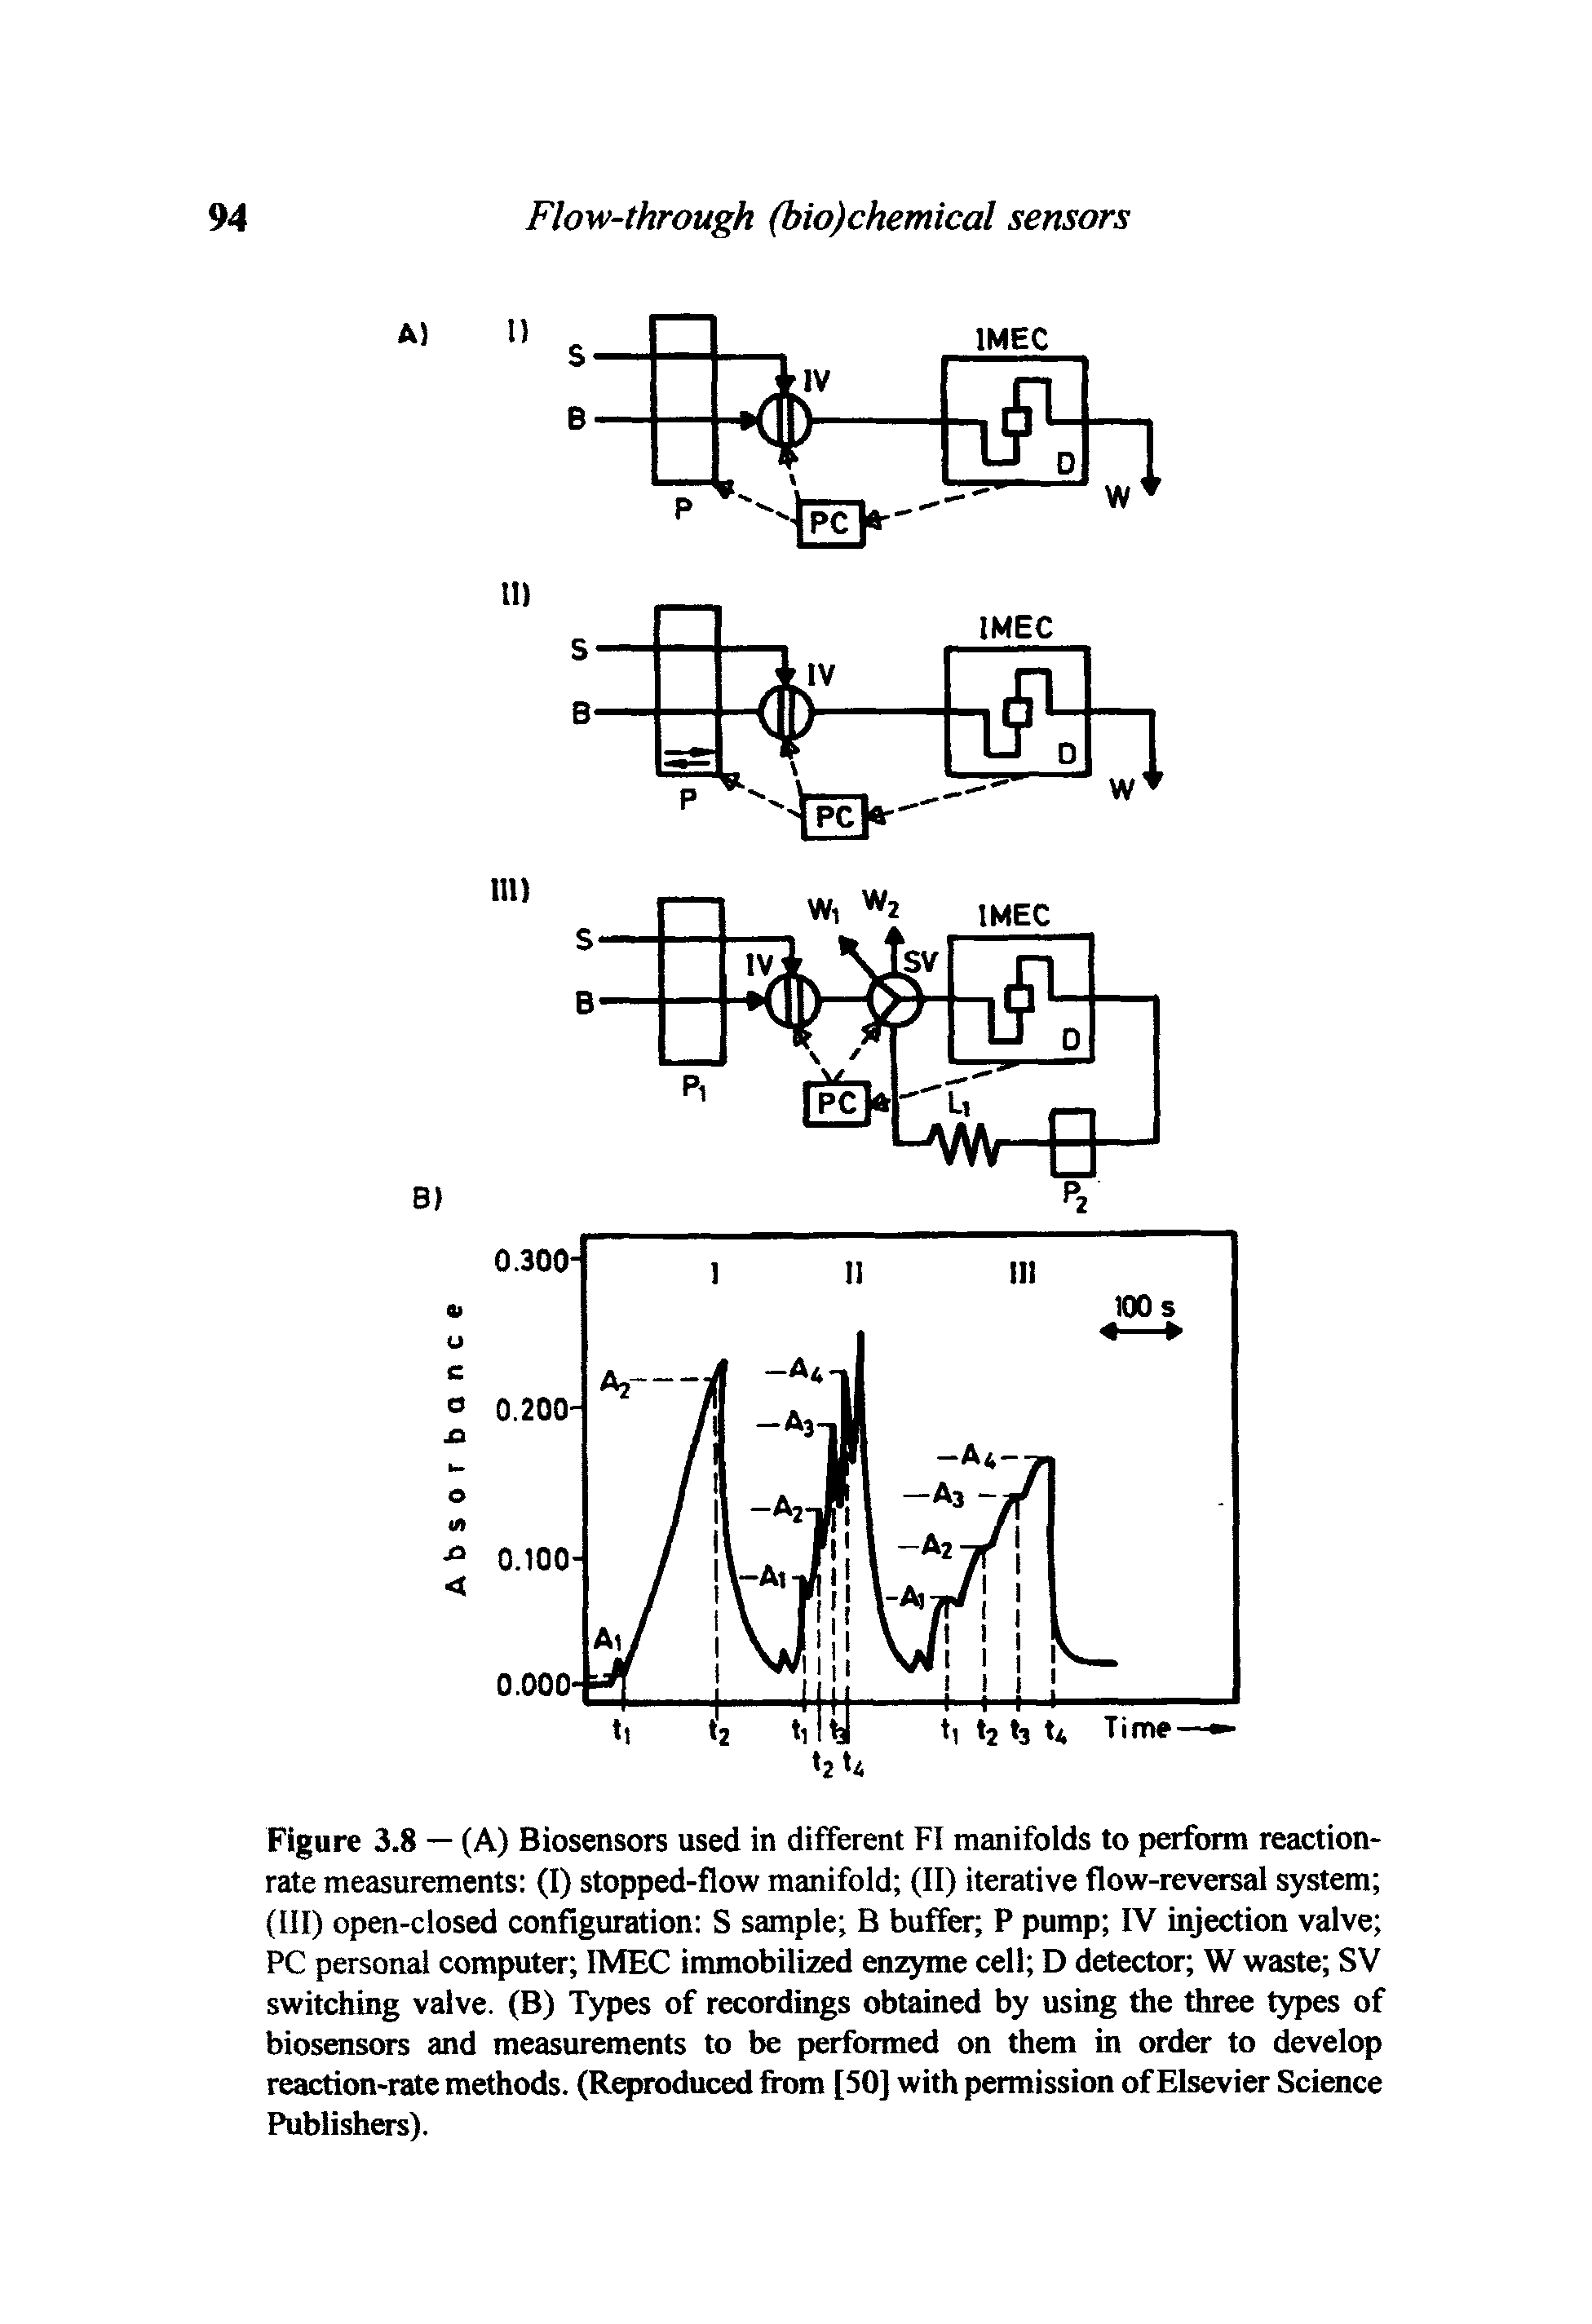 Figure 3.8 — (A) Biosensors used in different FI manifolds to perform reaction-rate measurements (I) stopped-flow manifold (II) iterative flow-reversal system (III) open-closed configuration S sample B buffer P pump IV injection valve PC personal computer IMEC immobilized enzyme cell D detector W waste SV switching valve. (B) Types of recordings obtained by using the three types of biosensors and measurements to be performed on them in order to develop reaction-rate methods. (Reproduced from [50] with permission of Elsevier Science Publishers).